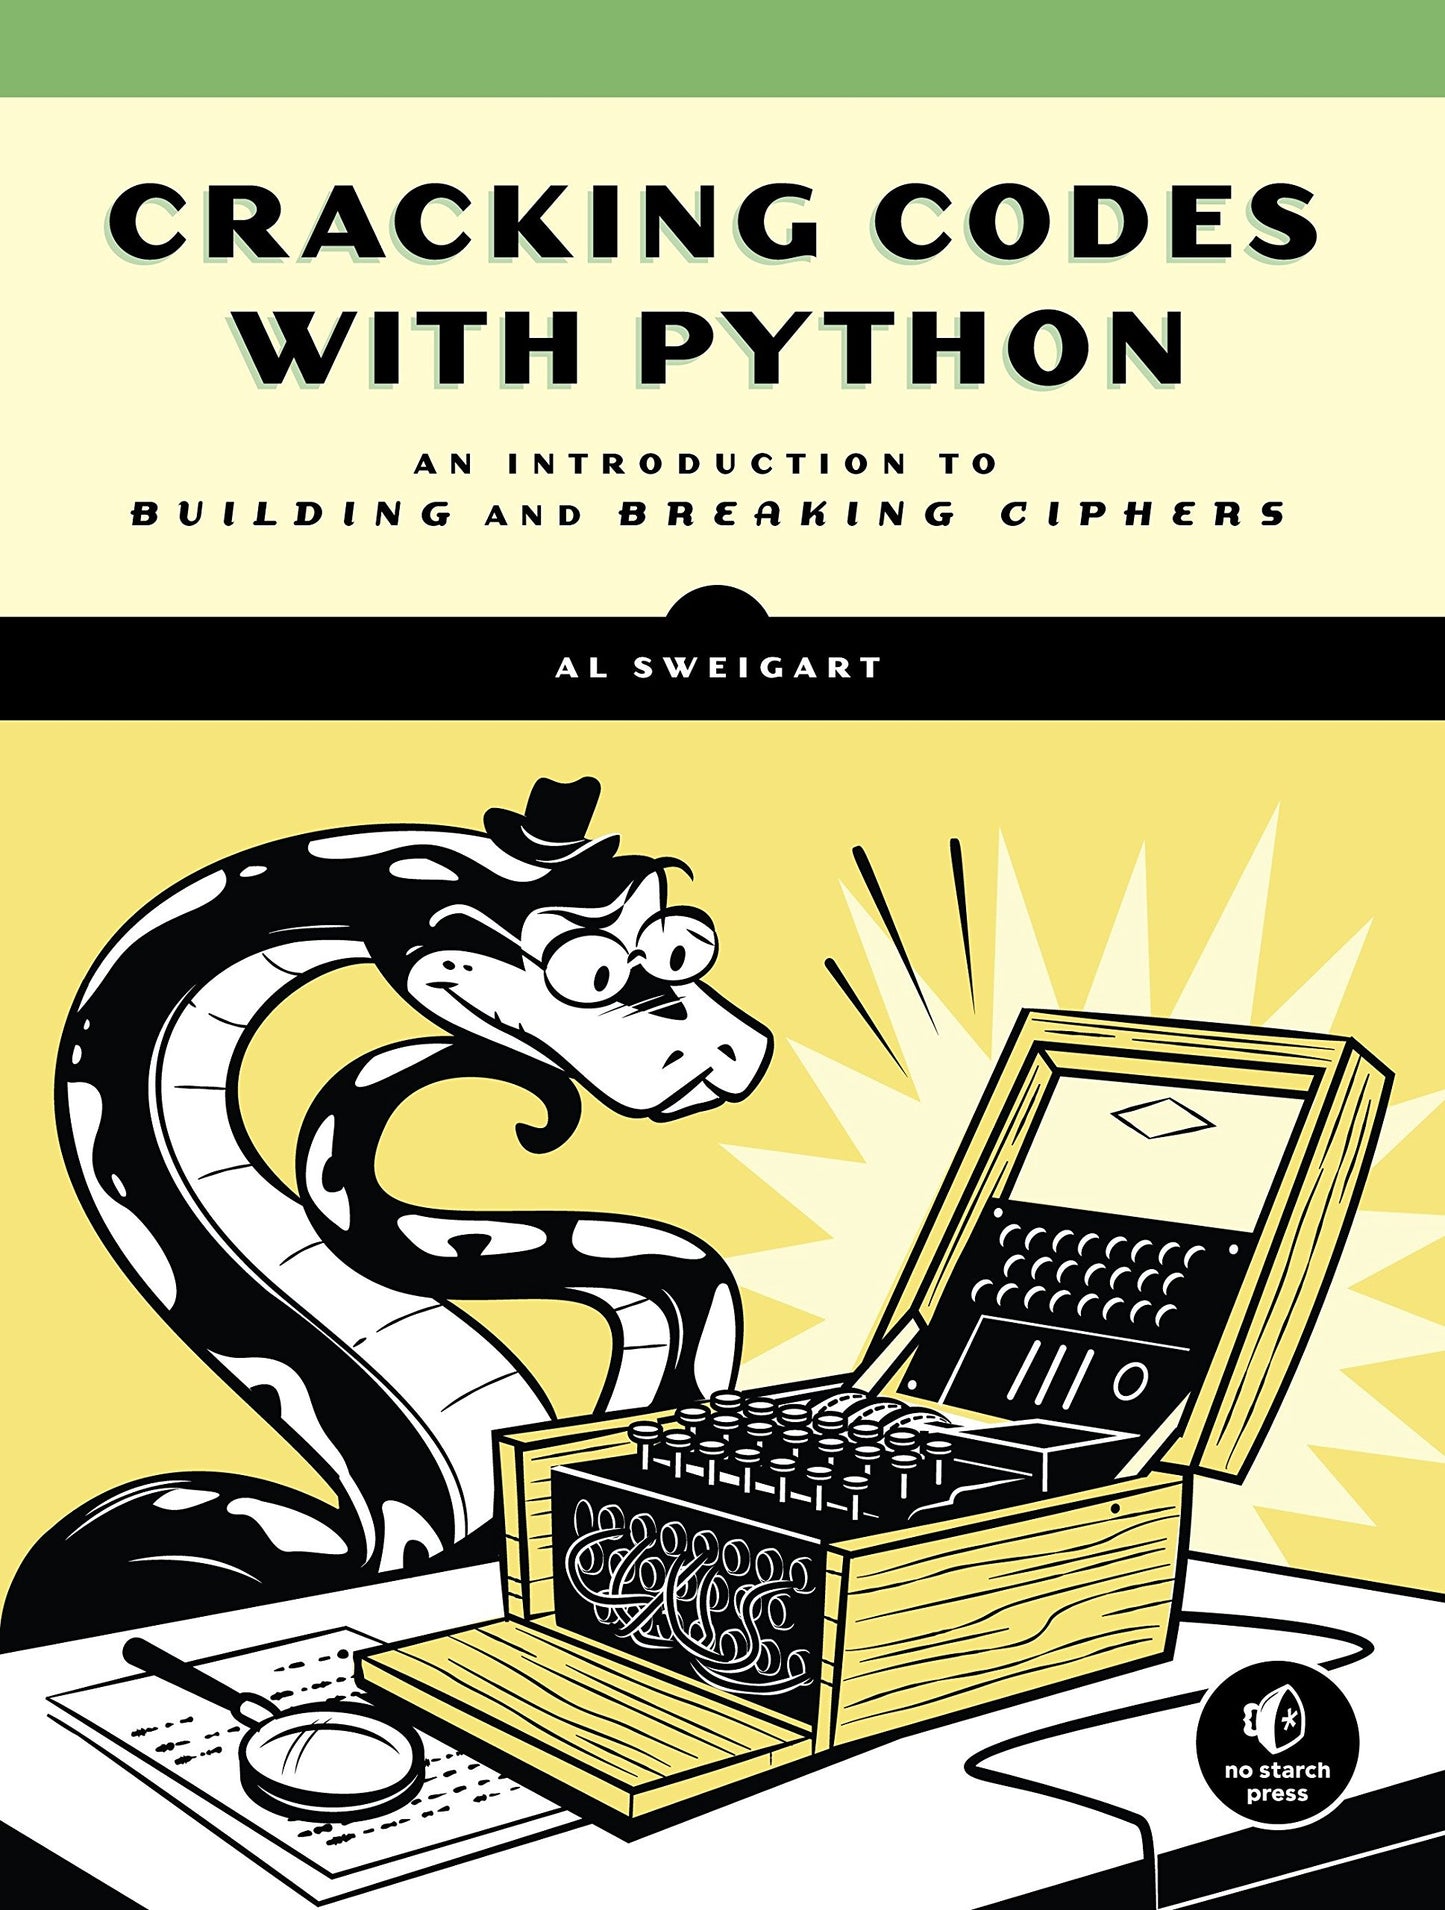 Cracking Codes with Python, Python Programming for Beginners, Digital Technology Education, Computer Science Teaching Resource, Cipher Programs, Cryptography Learning, Hands-On Coding, Debugging Skills, Practical Applications, Digital Technology Book, Digital Technology Resource, Computer Science Book, Electronics Book